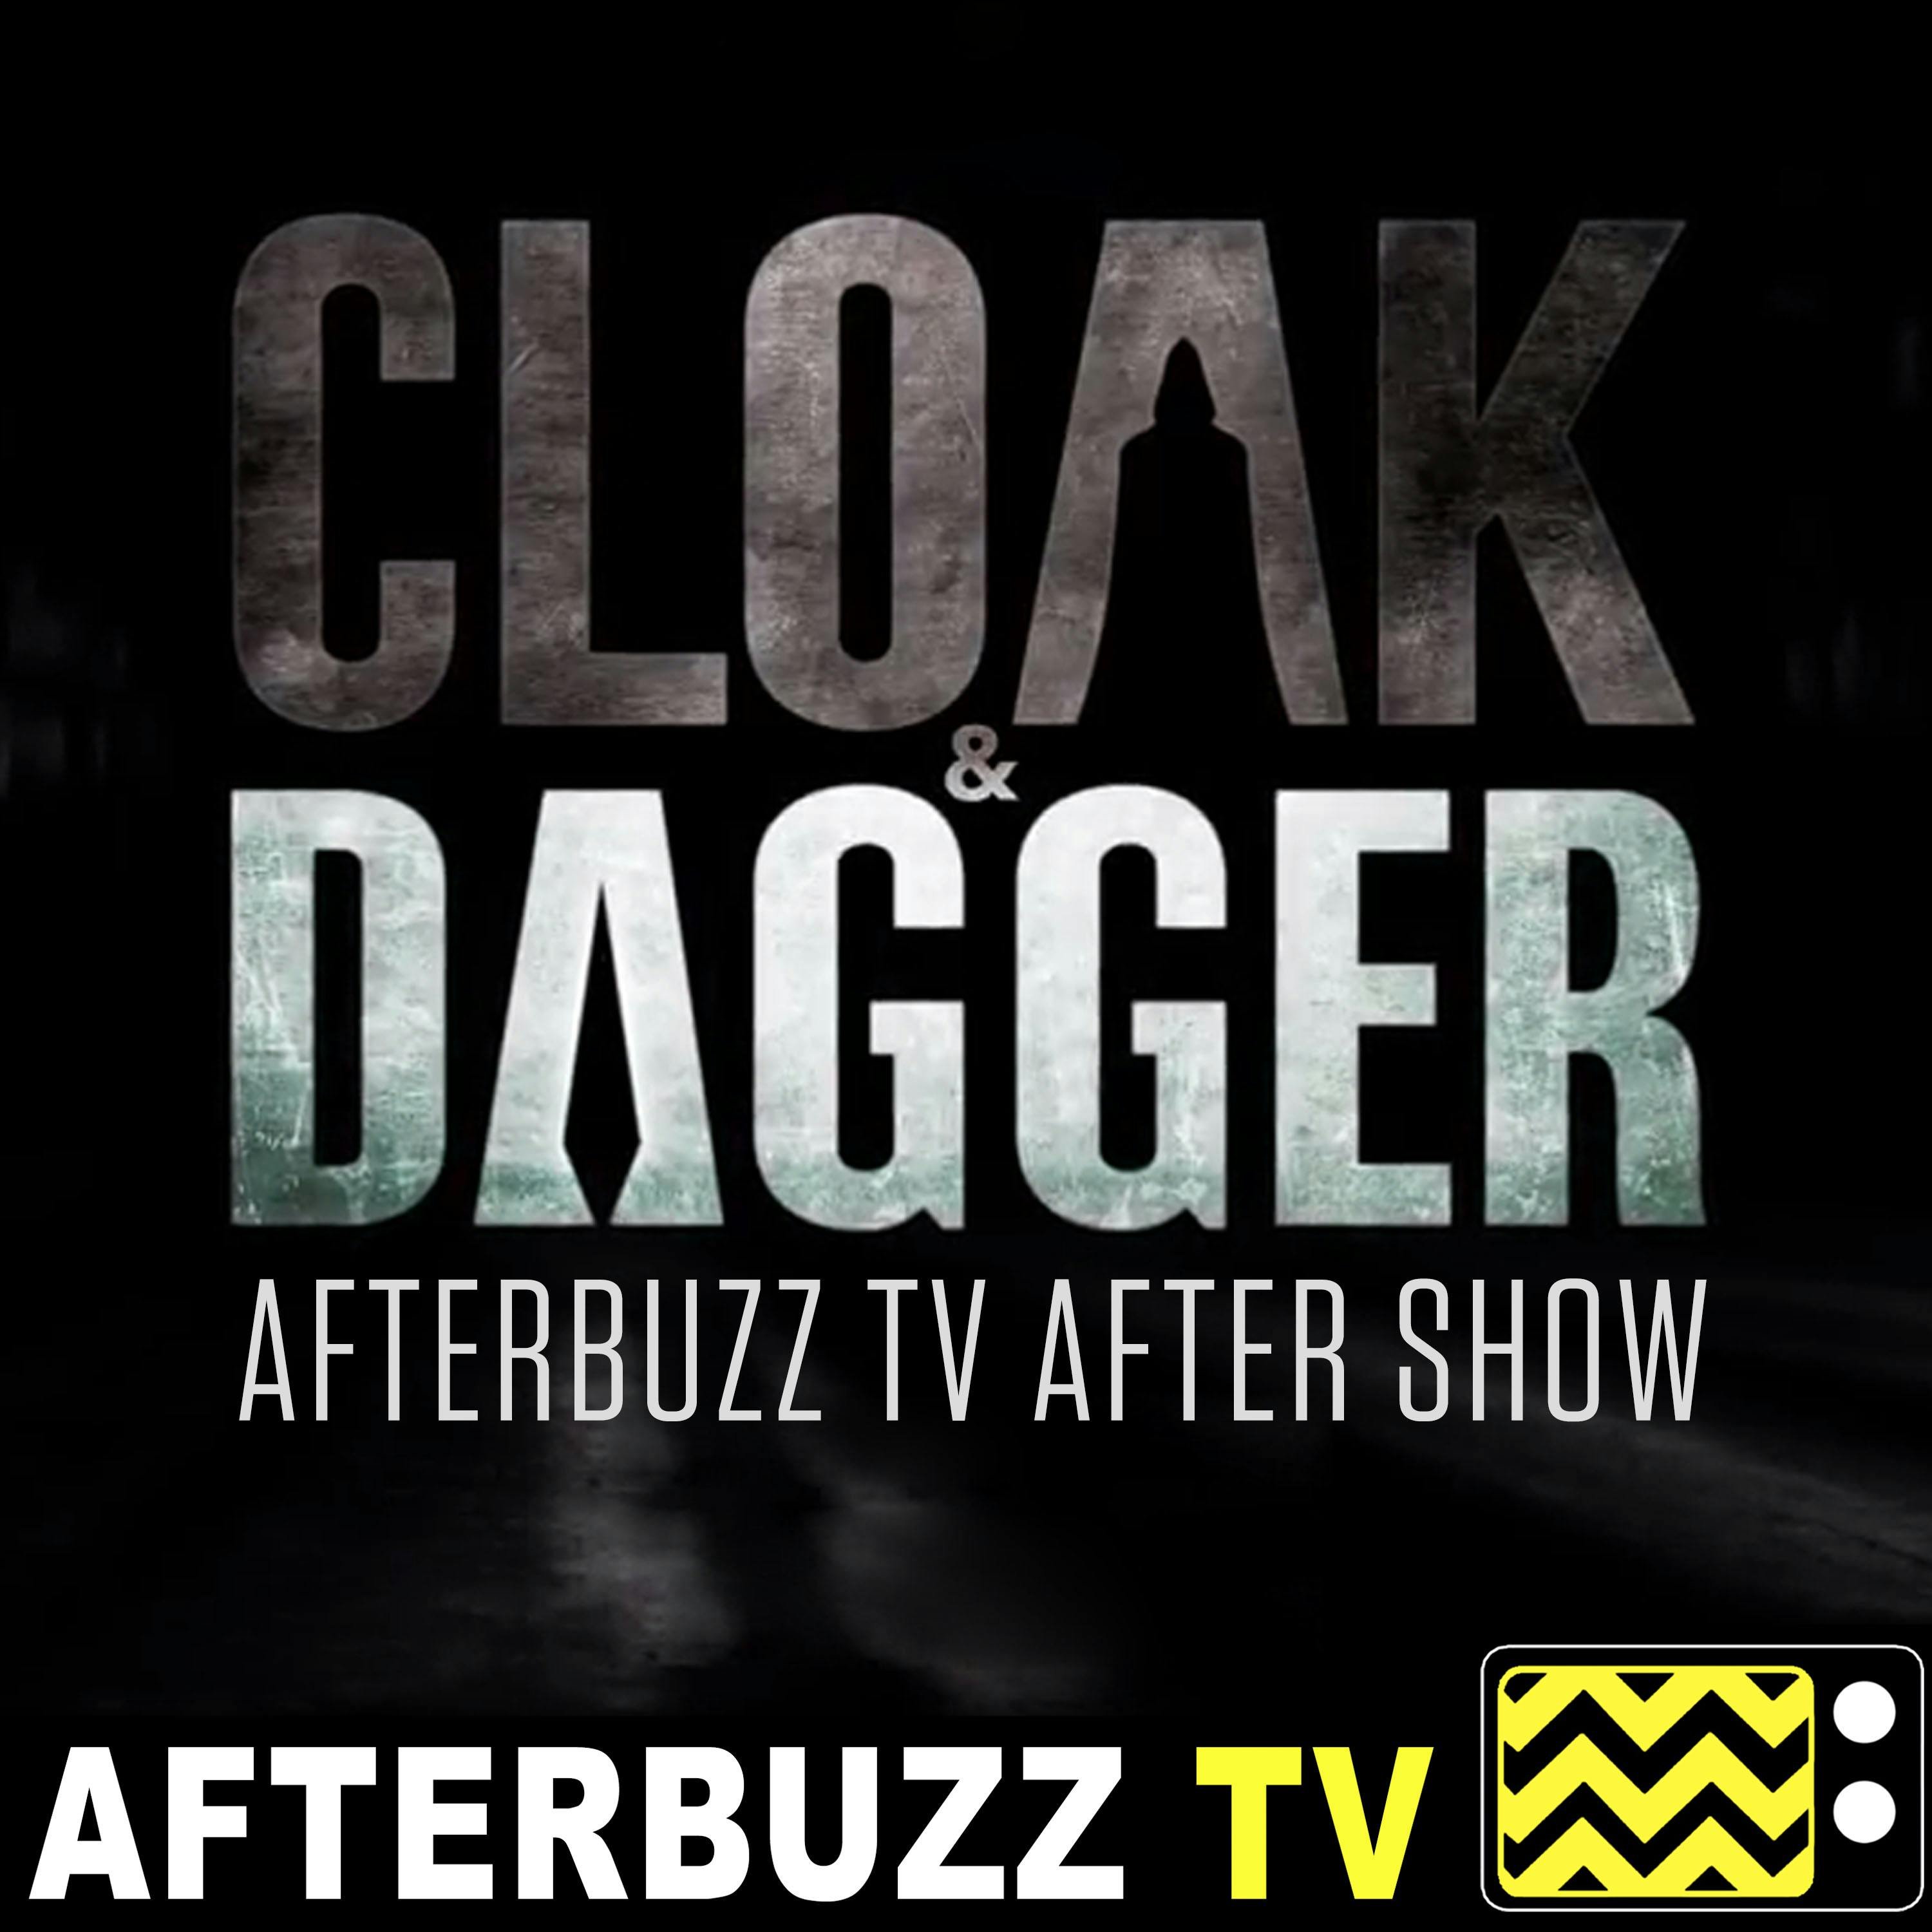 Cloak & Dagger S:1 | Ally Maki guests on Funhouse Mirrors E:6 | AfterBuzz TV After Show